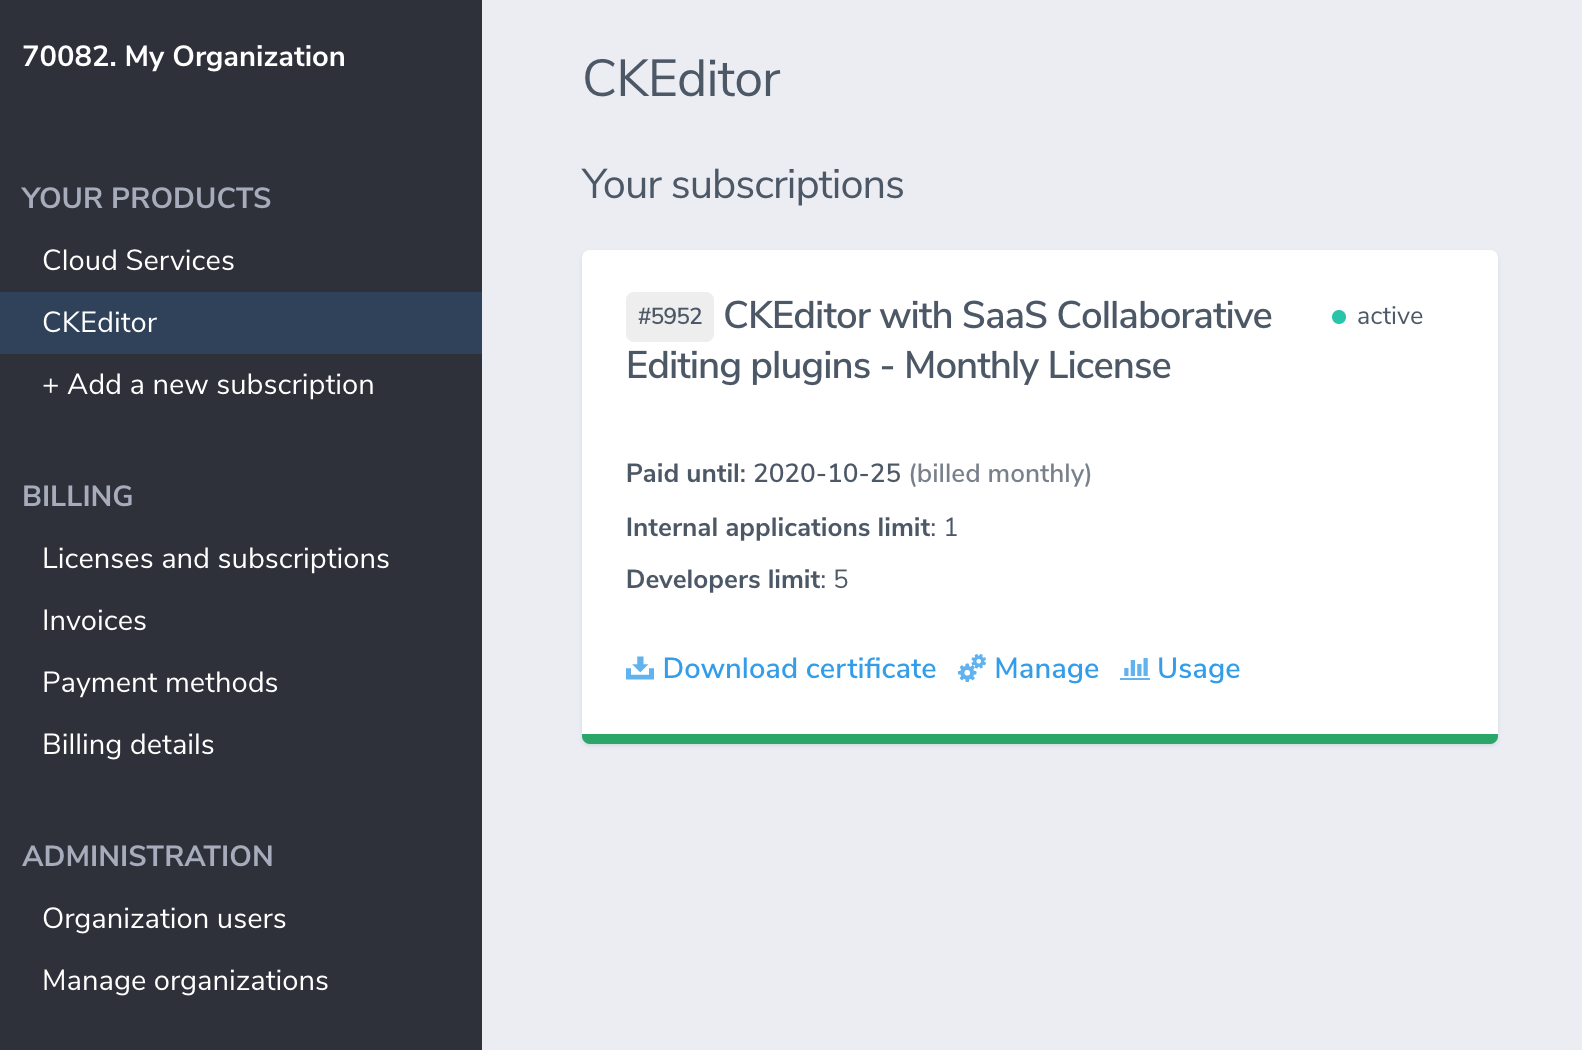 Your products view in CKEditor Ecosystem customer dashboard.